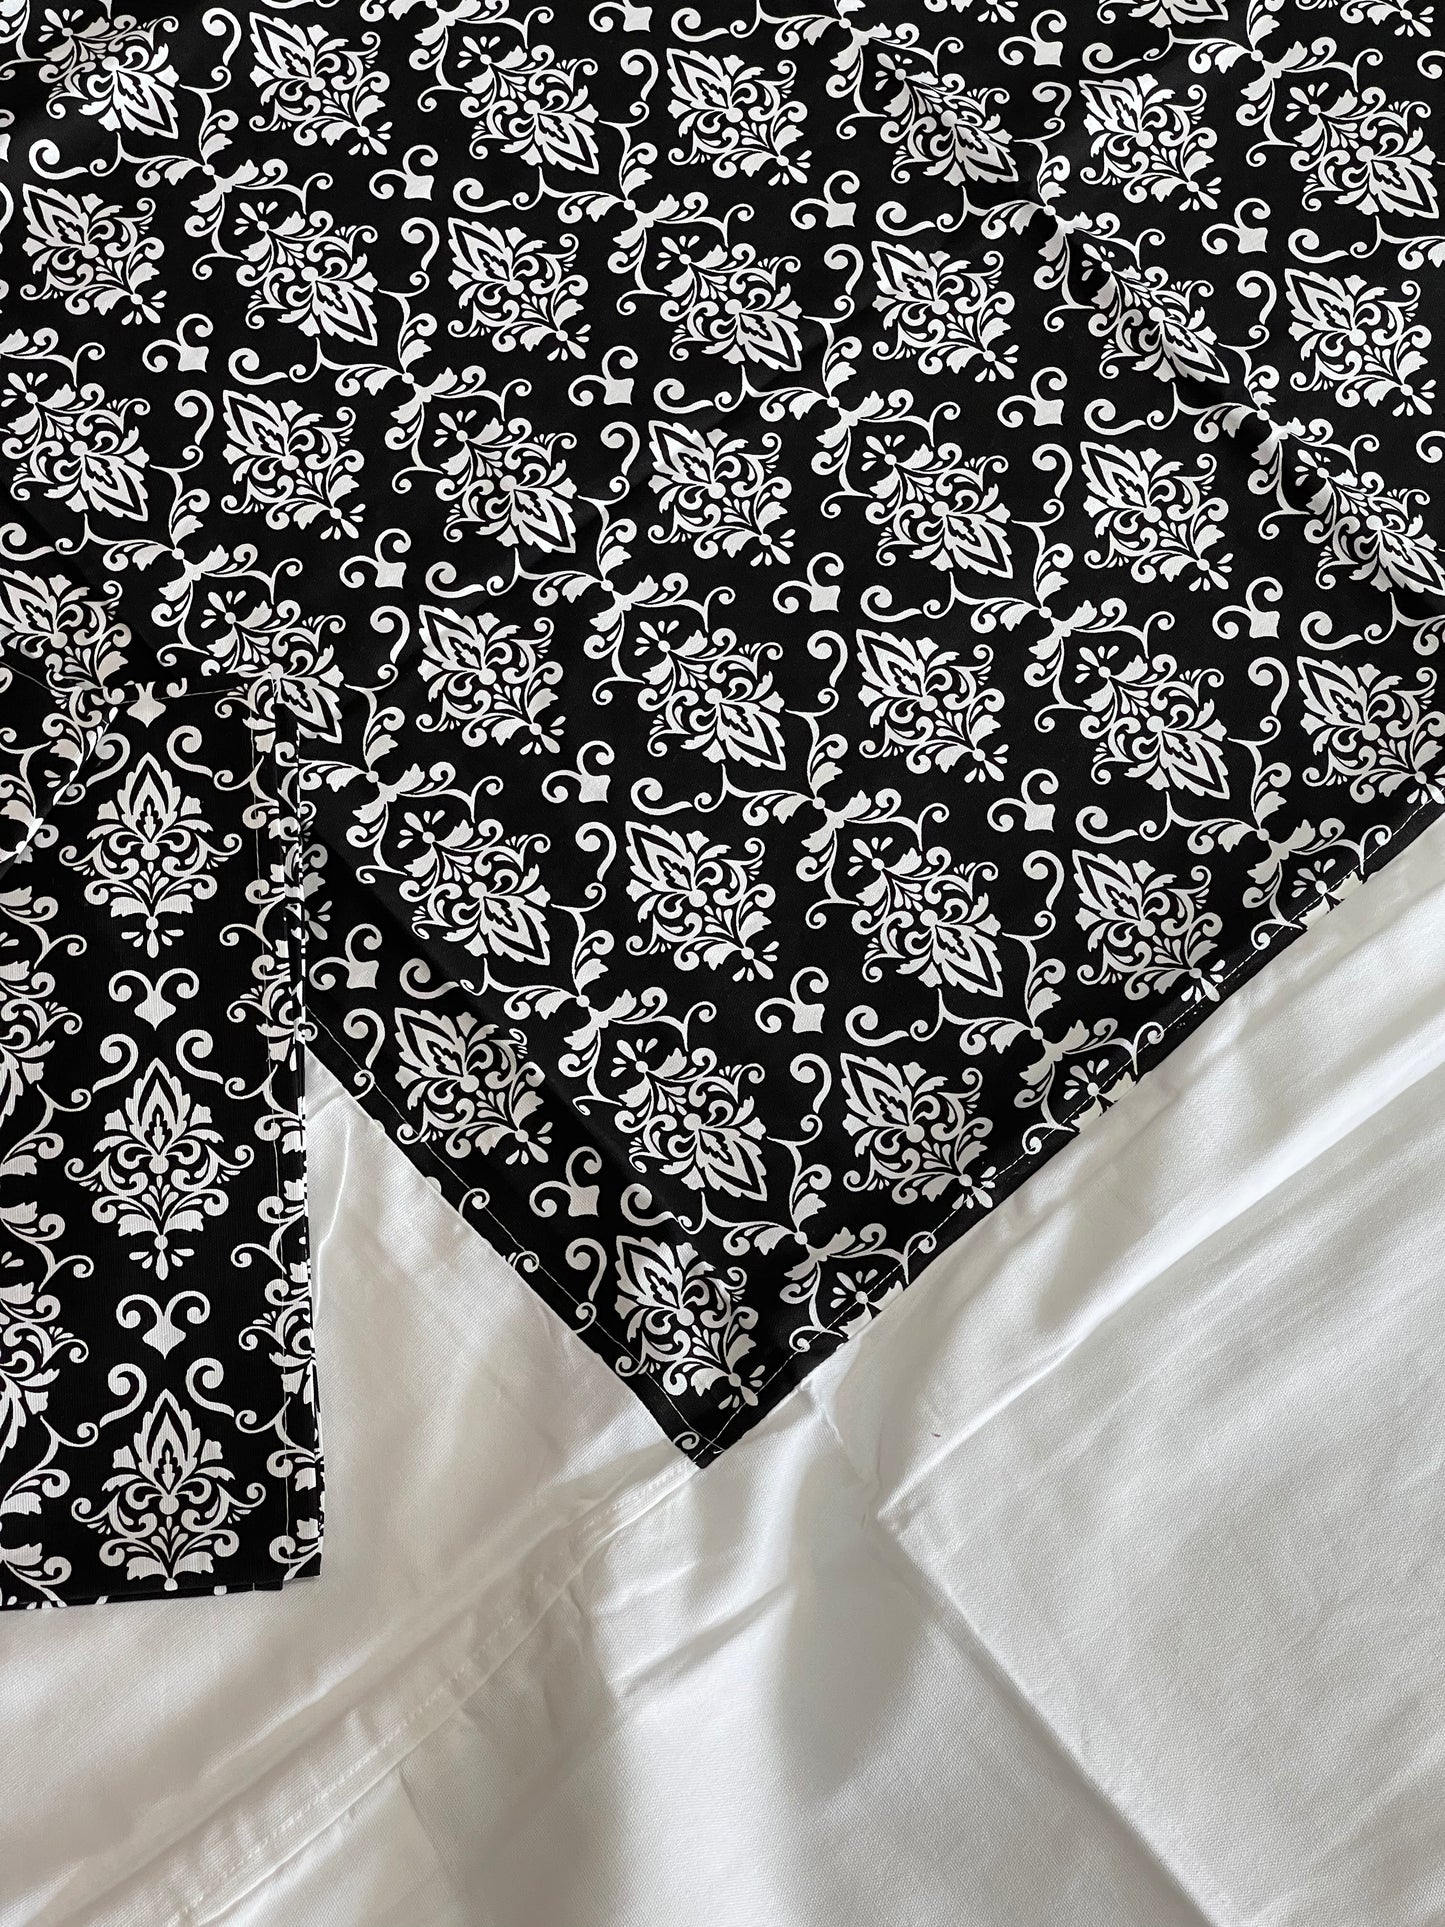 black and white floral printed cotton 86 x 96 inch bedsheet